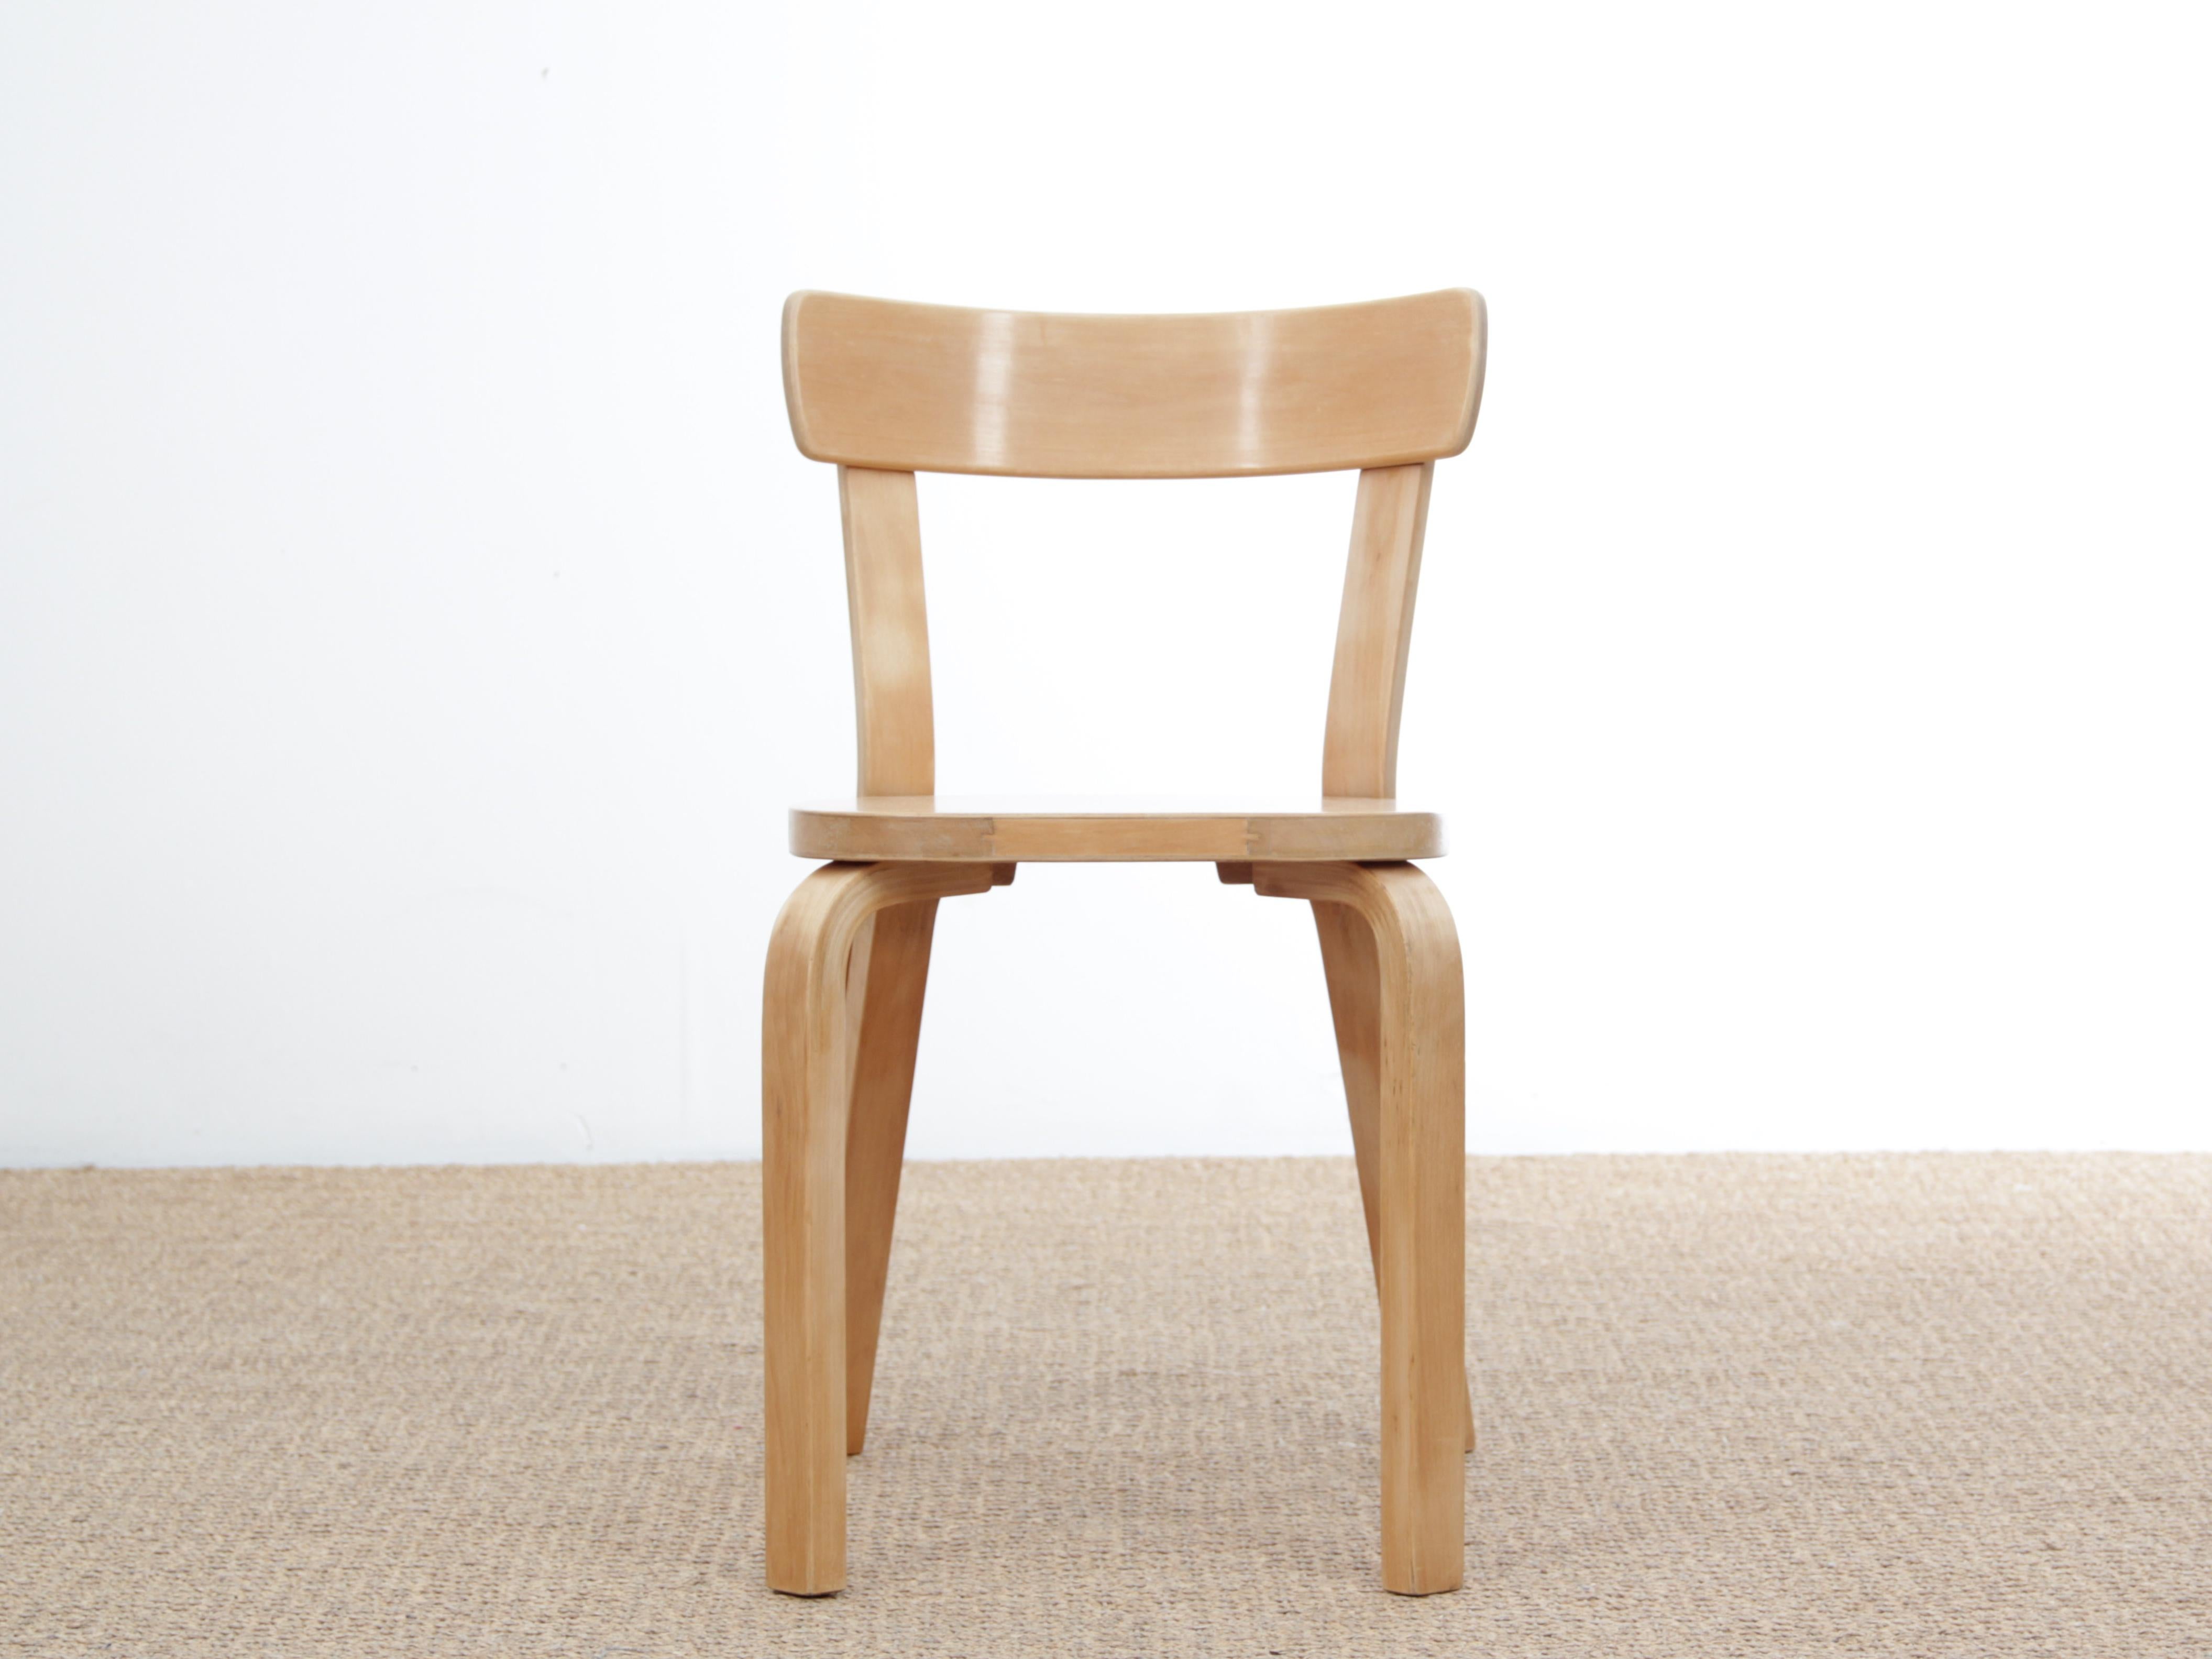 Mid-Century Modern Scandinavian pair of chairs model 69 by Alvar Aalto. Chair 69 is one of Artek’s most popular chairs, a universal wooden chair in the tradition of Classic kitchen and café chairs.